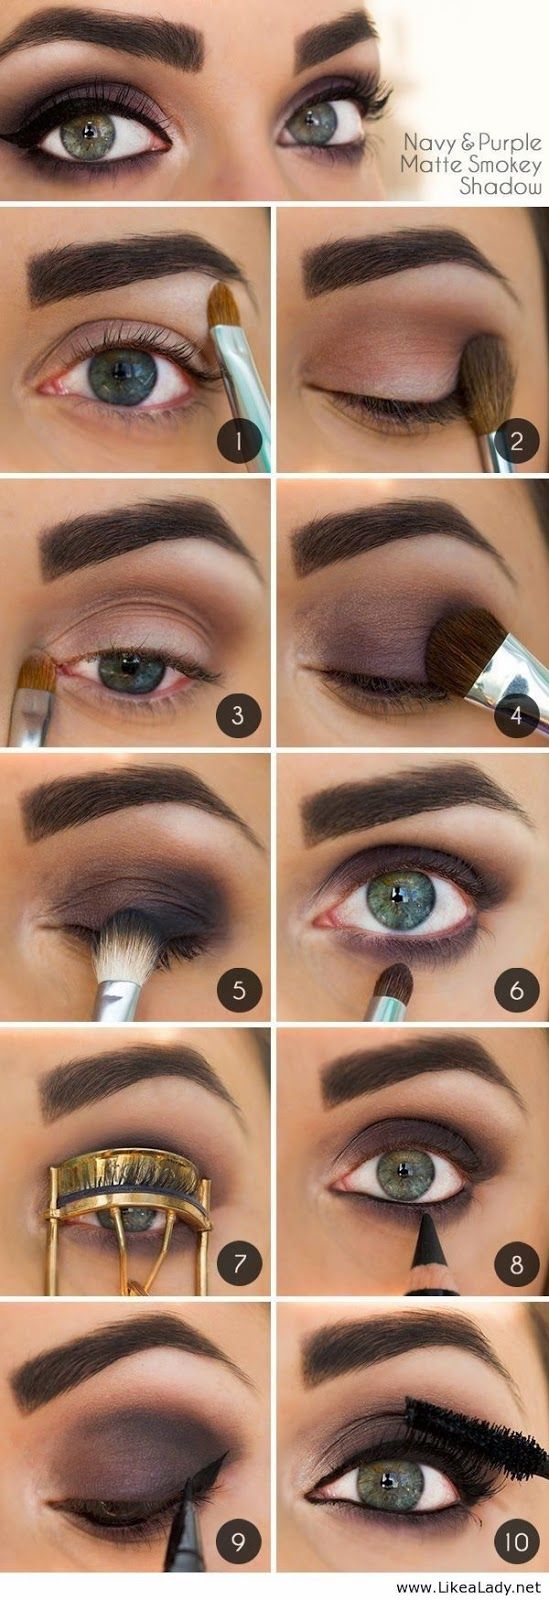 Best Smokey Eye Make-up Step By Step Tutorial and Ideas with Pictures (6)